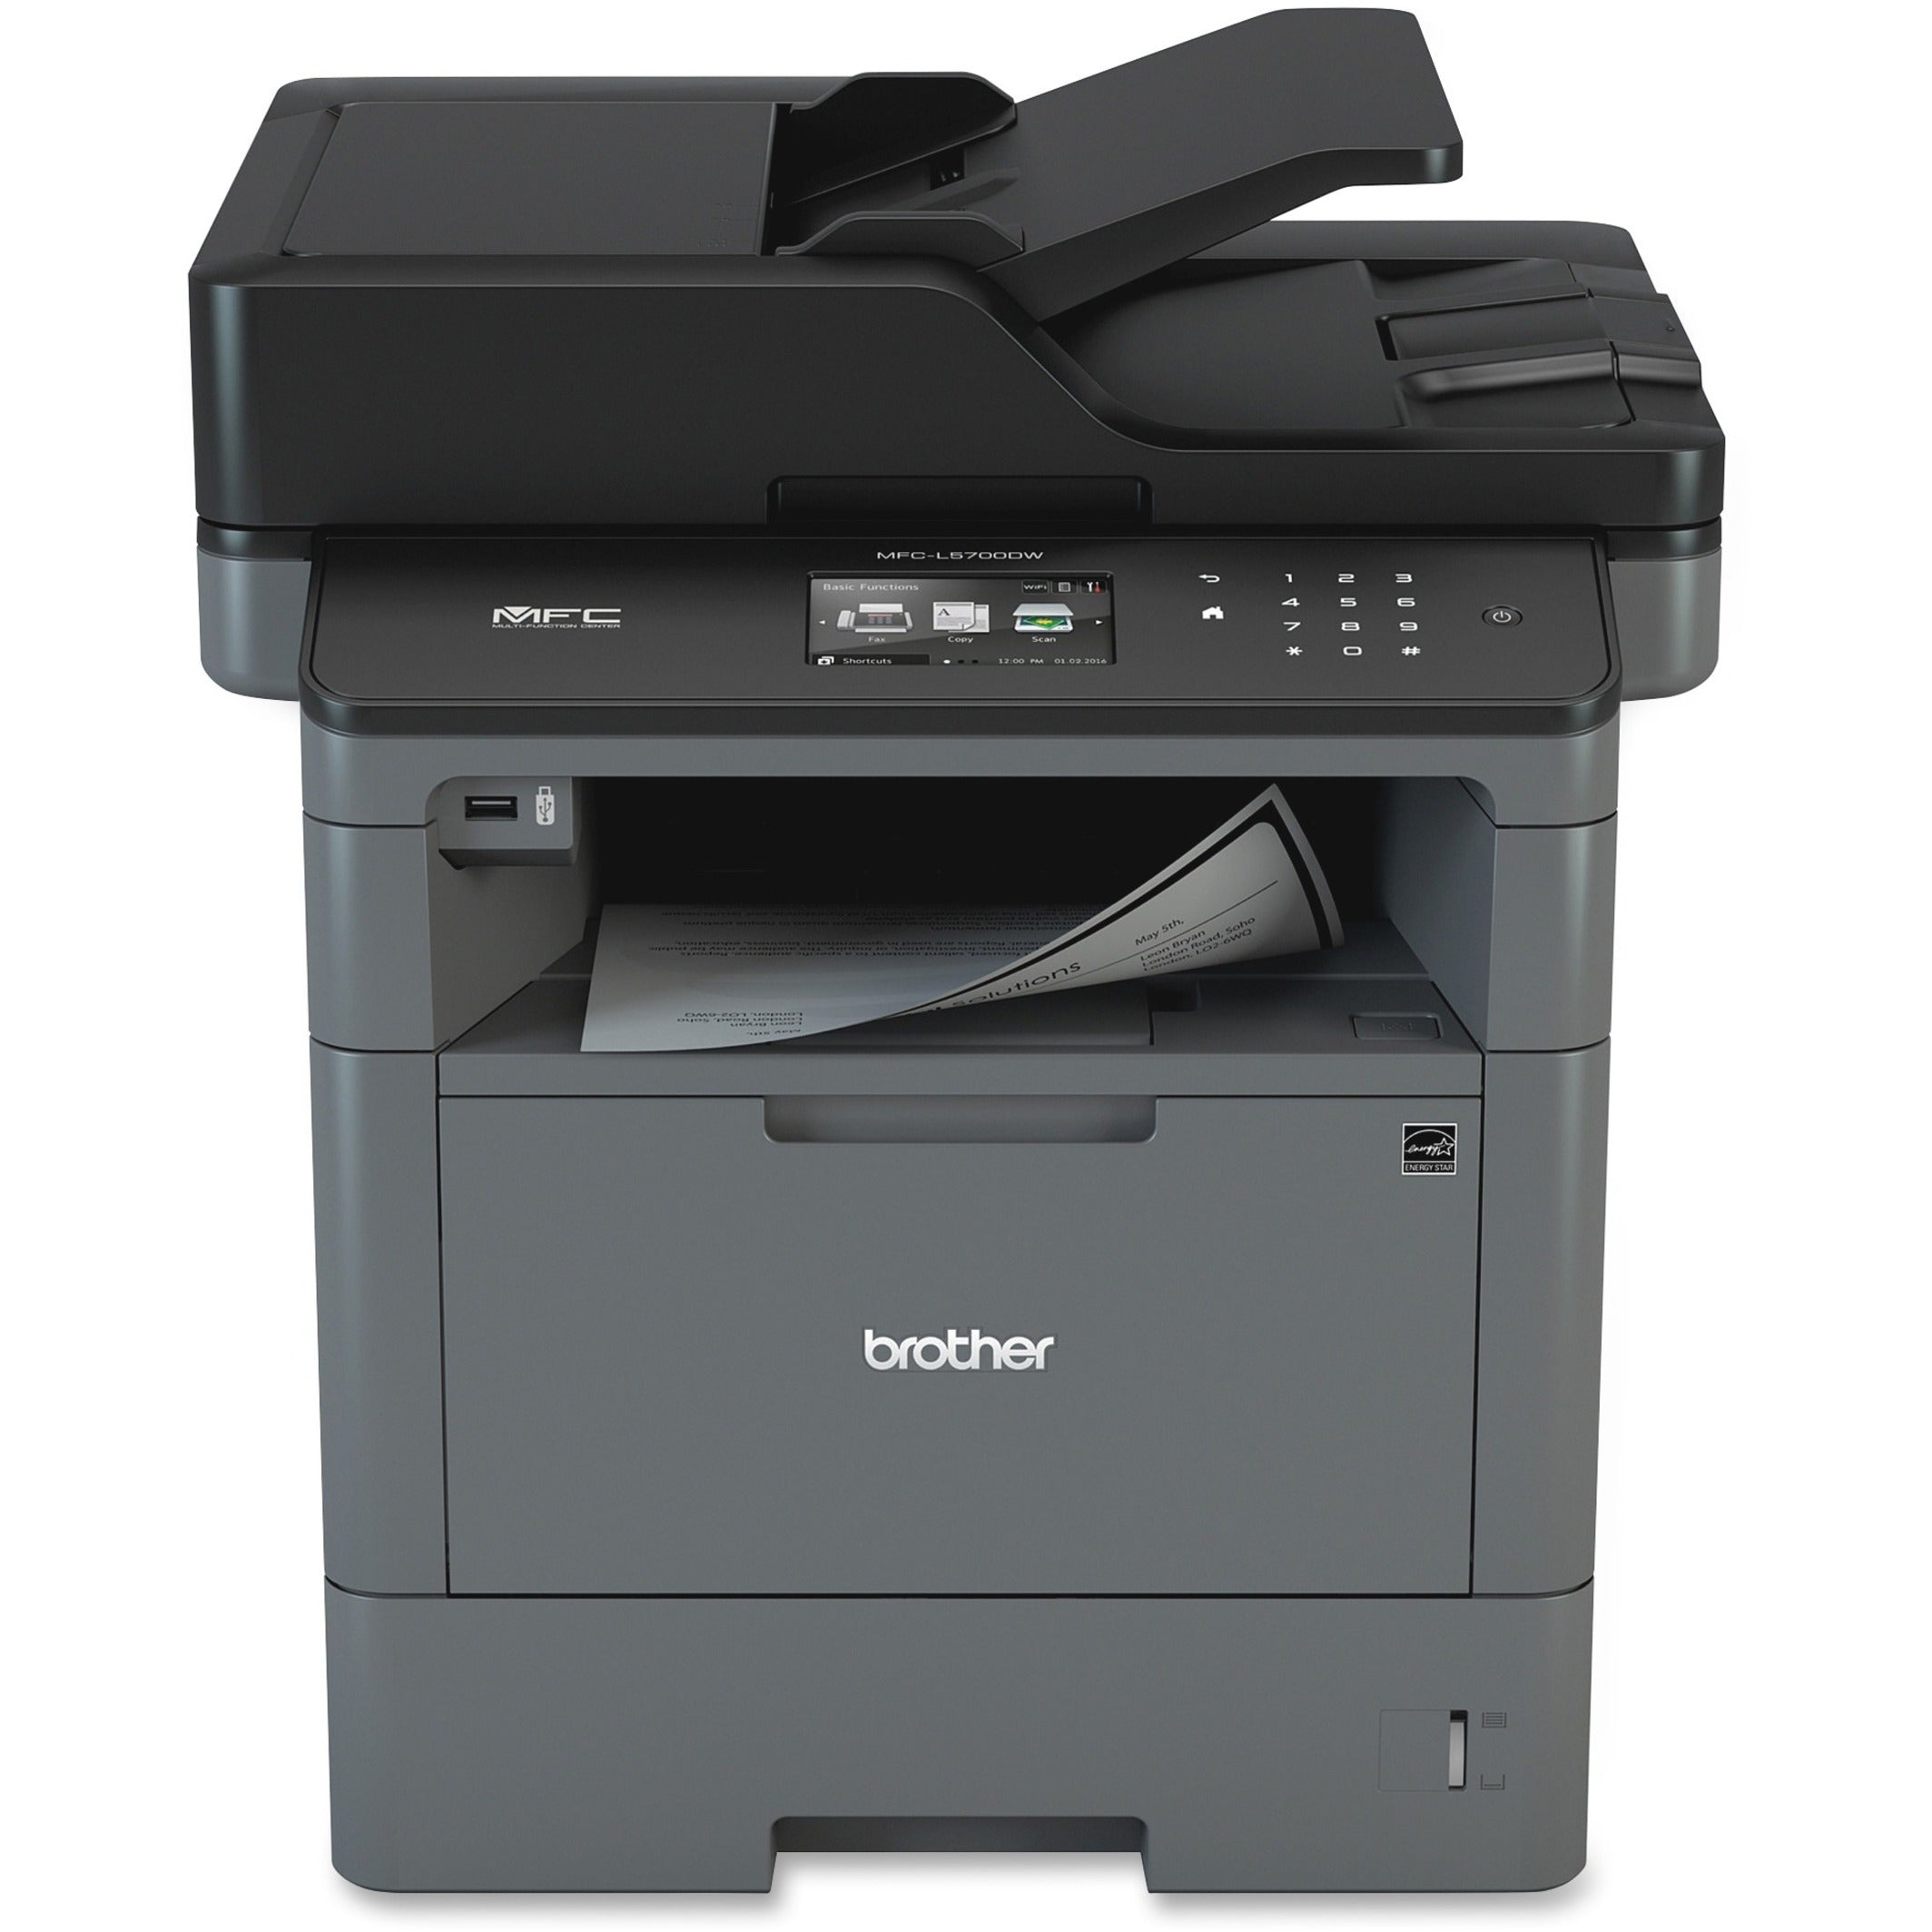 Brother MFCL5700DW Laser All-in-one Printer, 42ppm, 300Sht Cap, Black/Gray